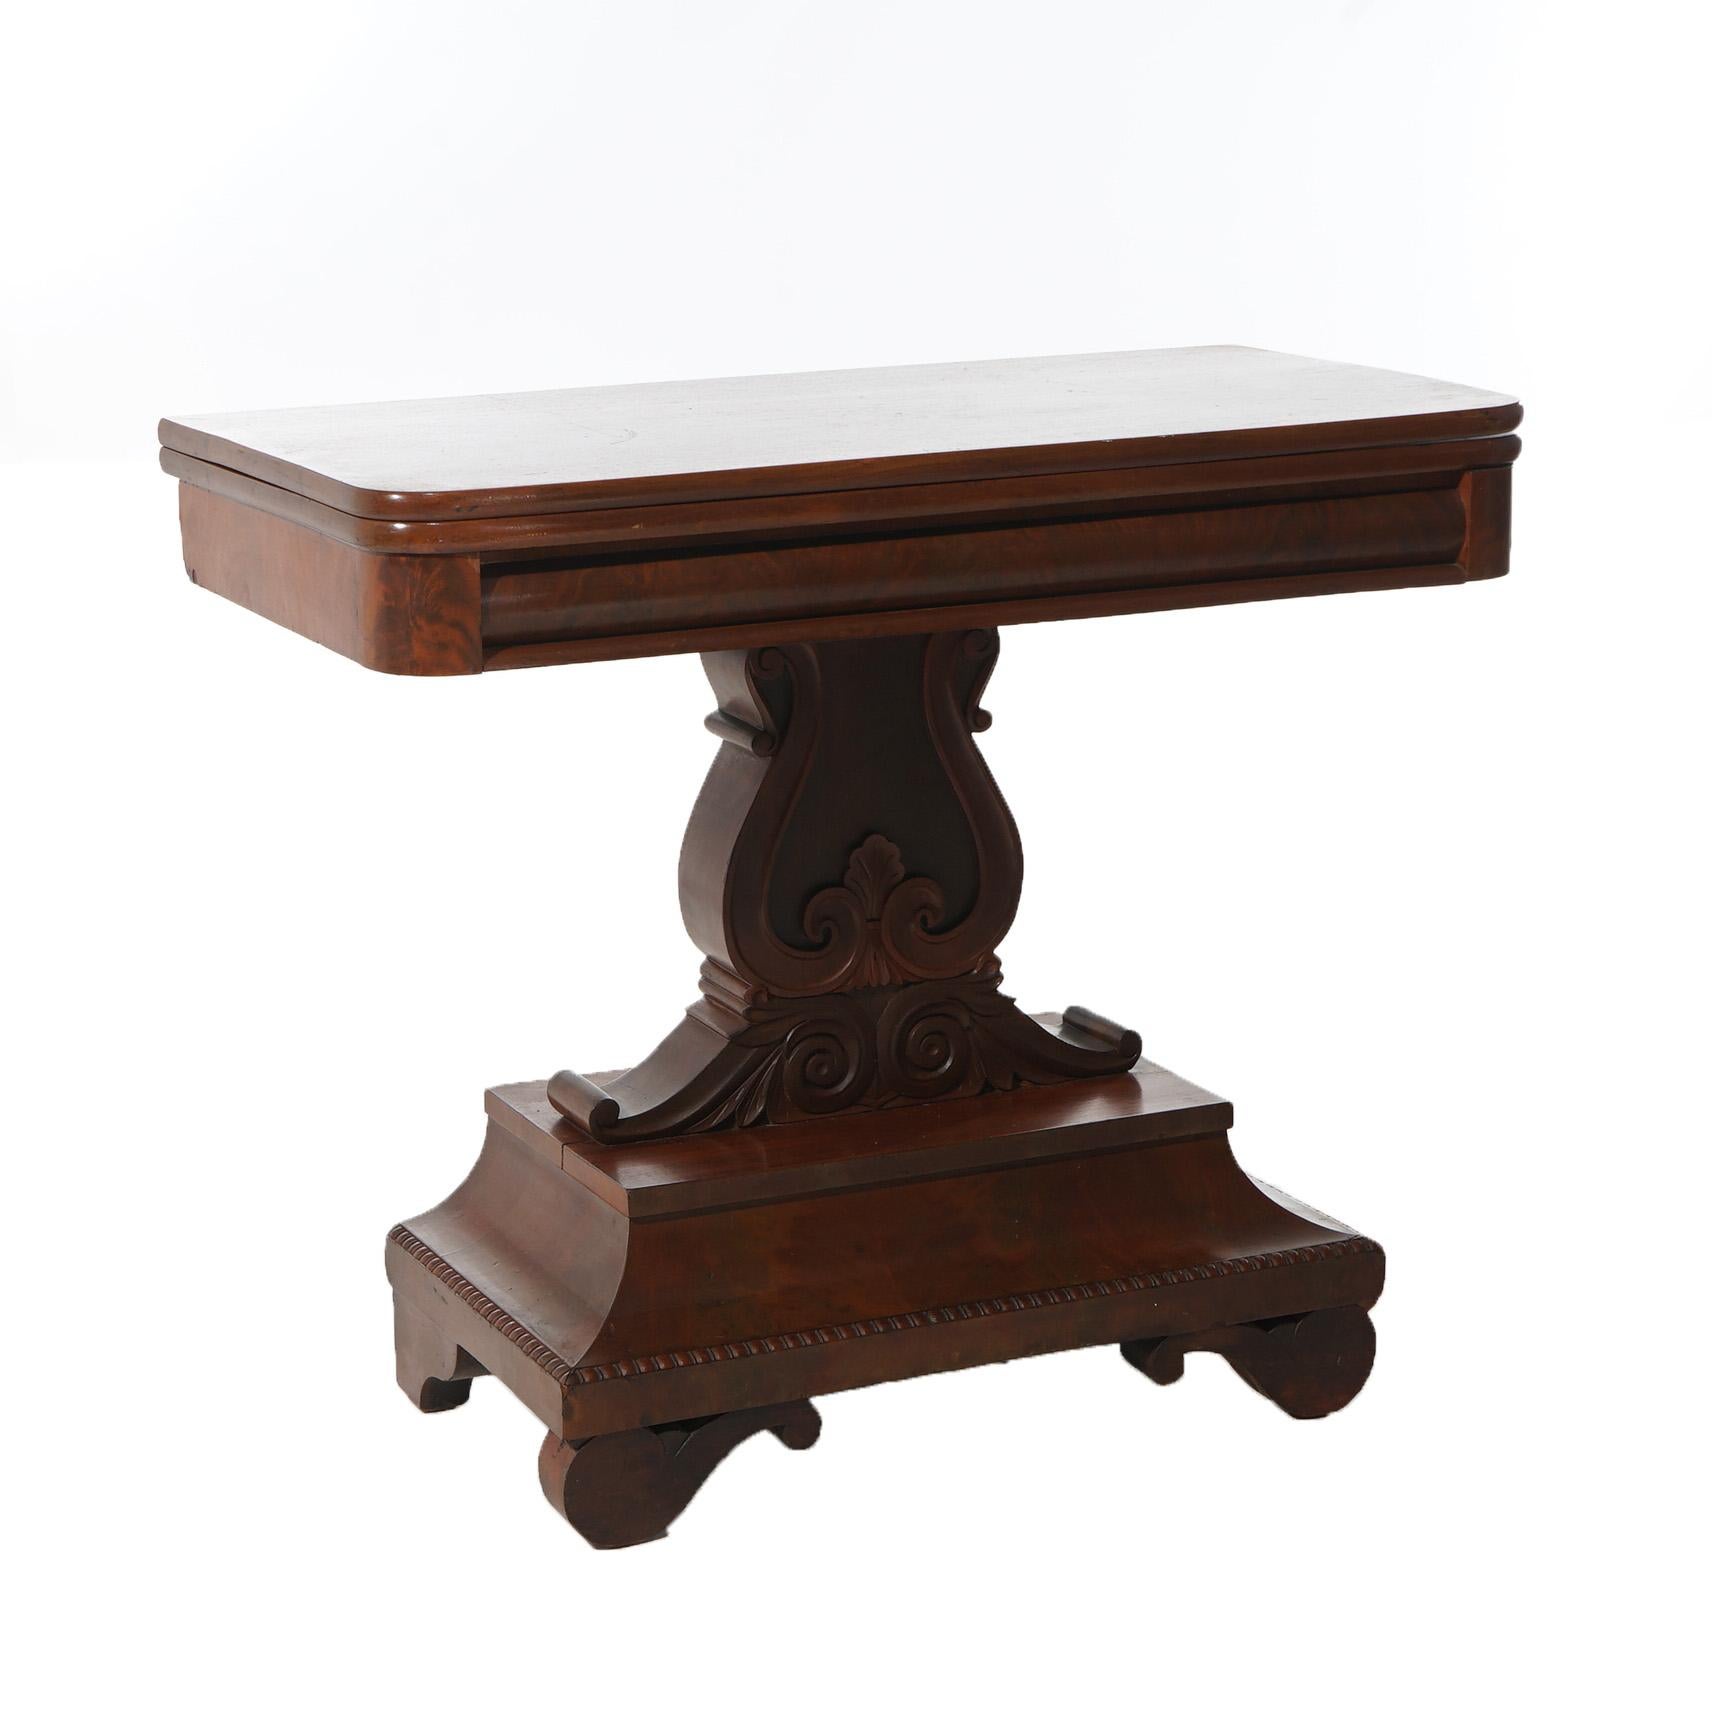 Antique American Empire Neoclassical Greco Flame Mahogany Card Table C1840 For Sale 4